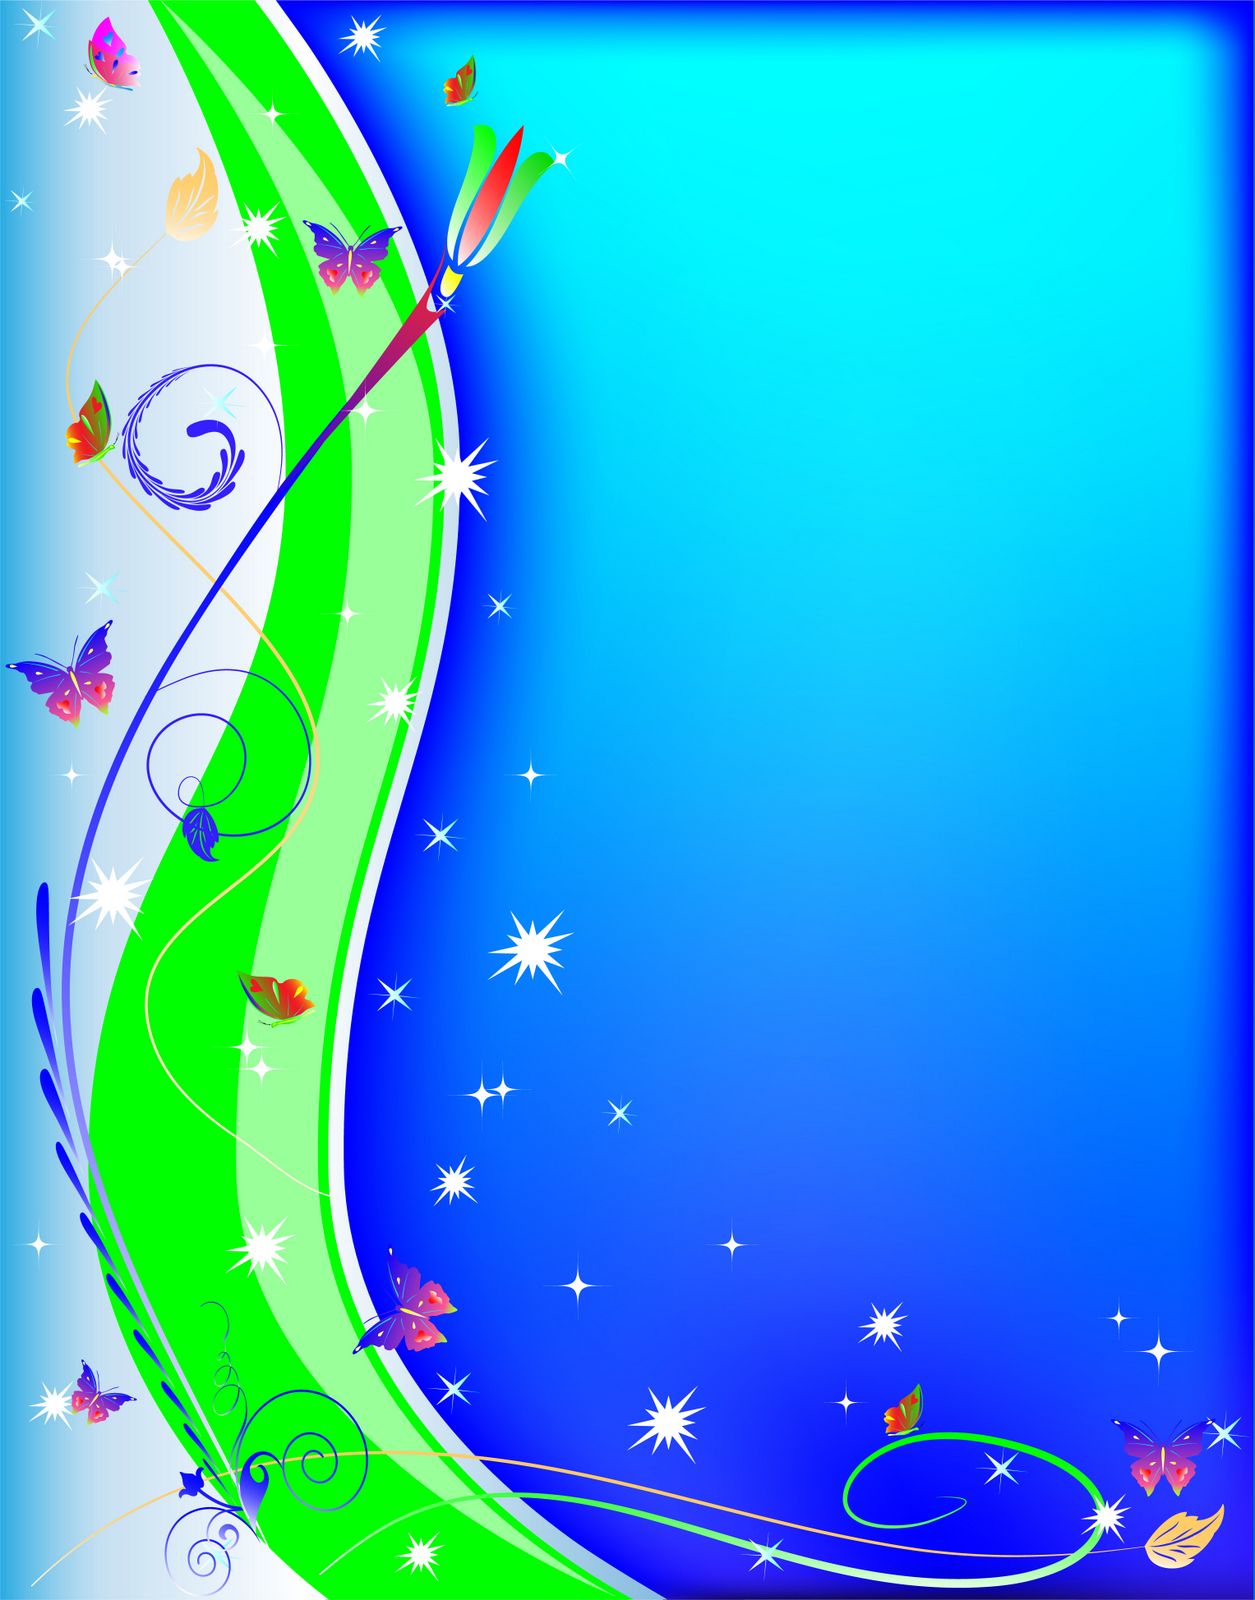 Wavy lines and butterflies Background